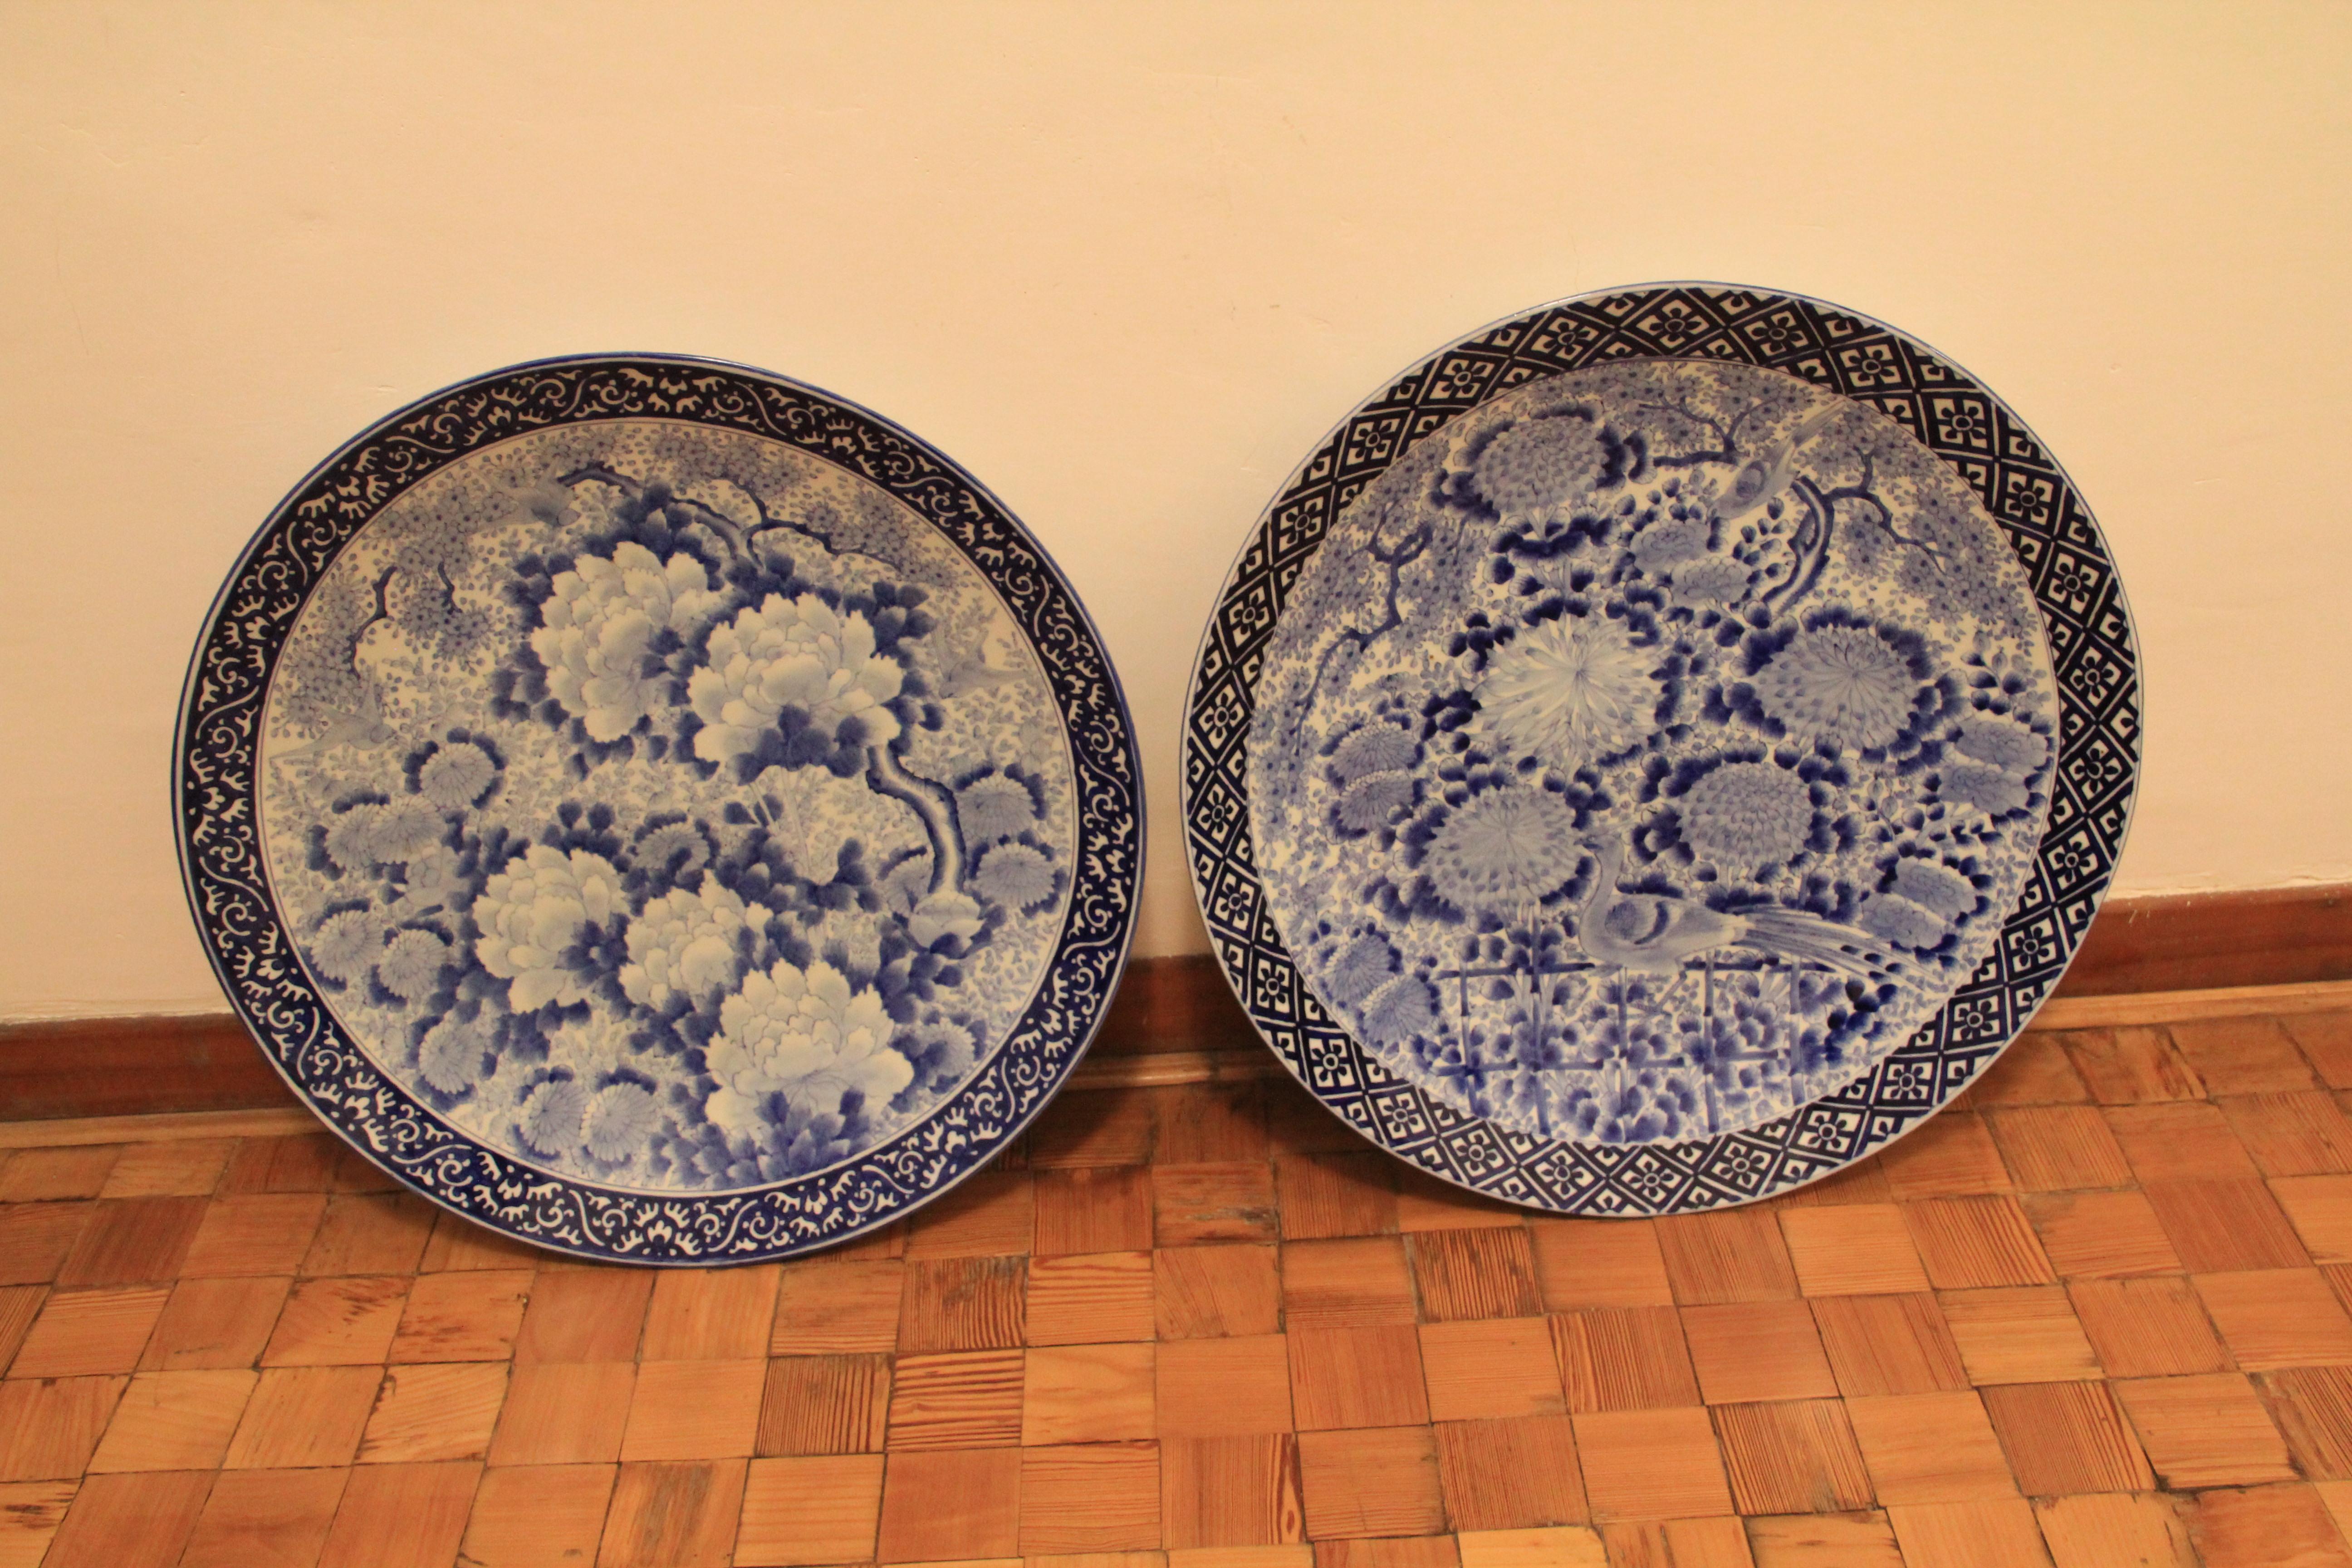 Two large Japanese dishes decorated in underglaze blue with chrysanthemum and bird pattern centres and geometric motif borders, these were made in Japan in the late 19th-early 20th century.
Measure: 56 cm width, 7.5 cm height.